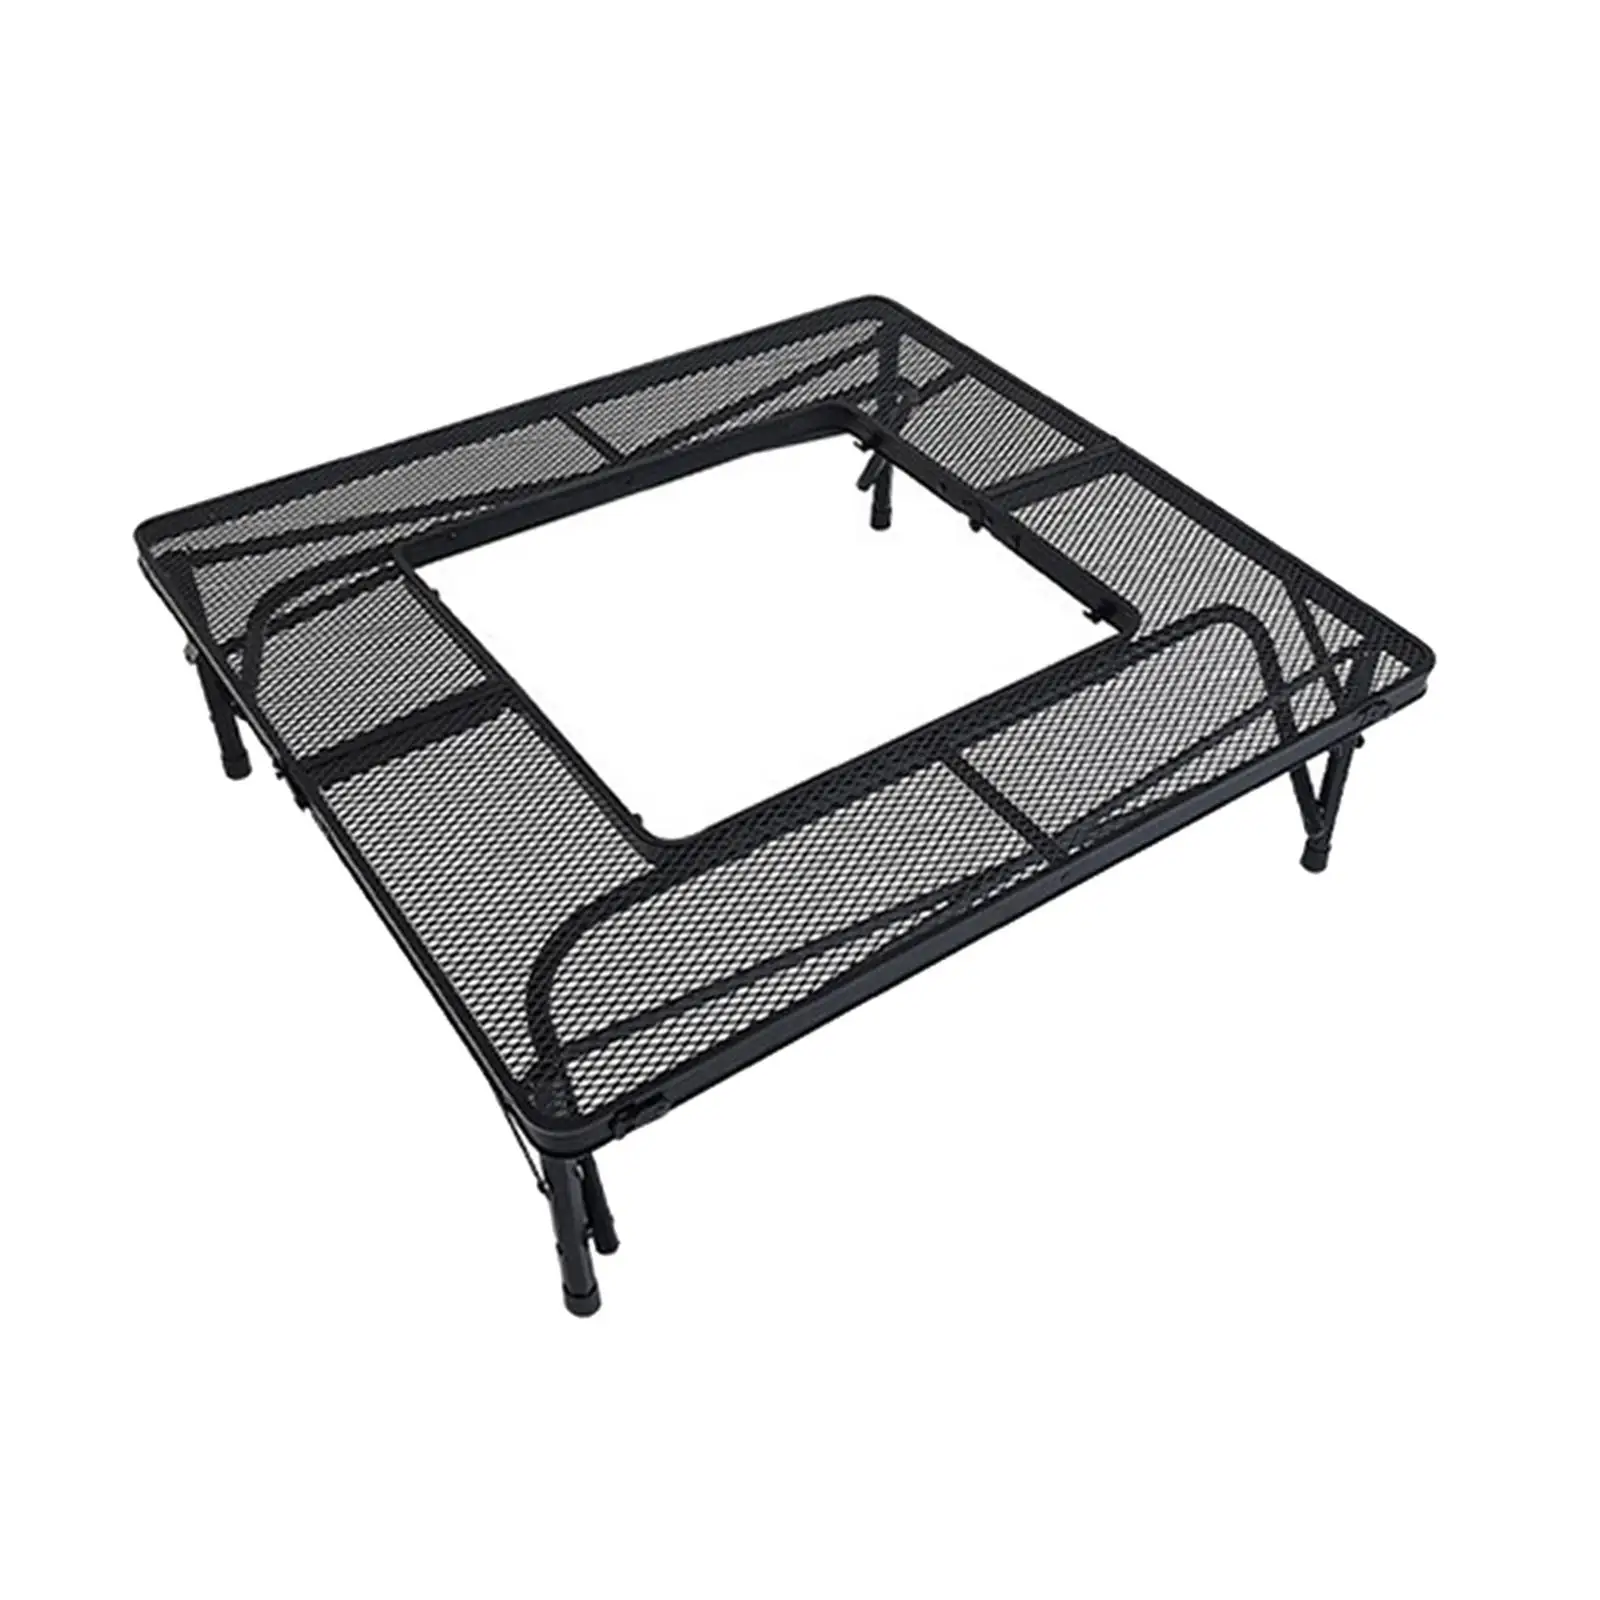 Outdoor Folding Table Aluminum Alloy BBQ Desk Camping Table Barbecue Table for Cooking Backyard Mountaineering Beach Hiking